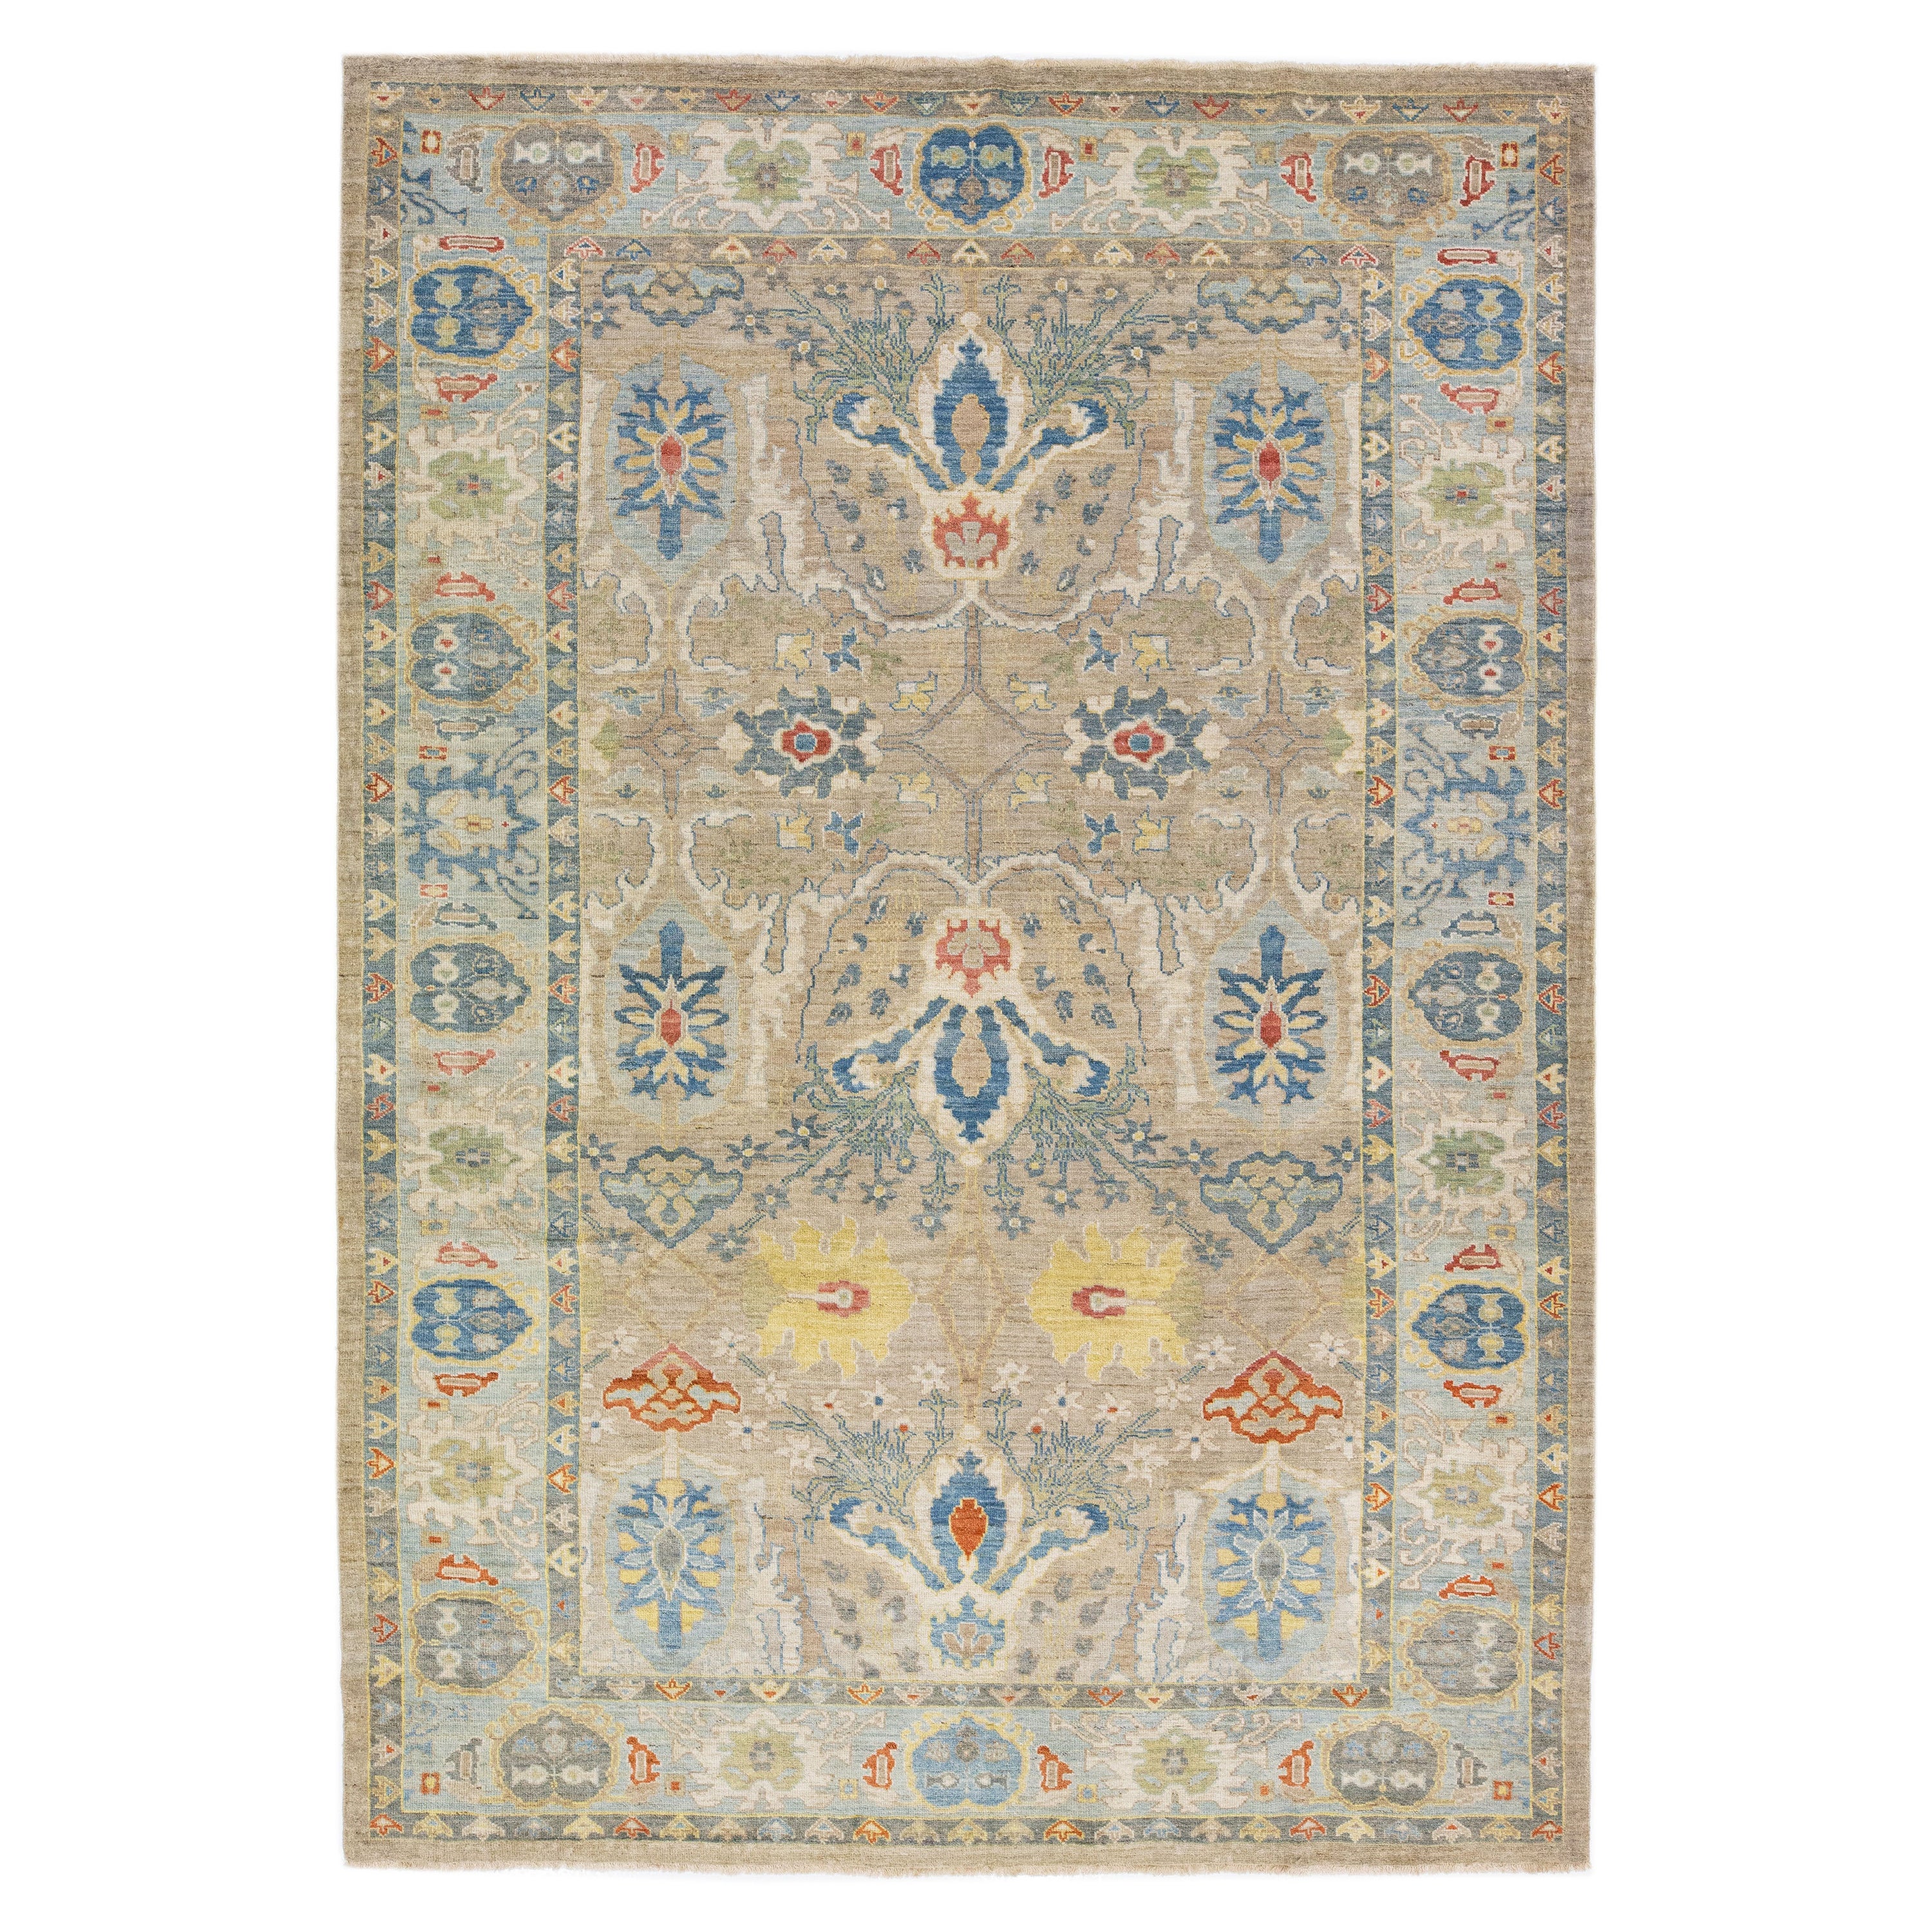 Tan Modern Sultanabad Handmade Persian Wool Rug with Floral Pattern